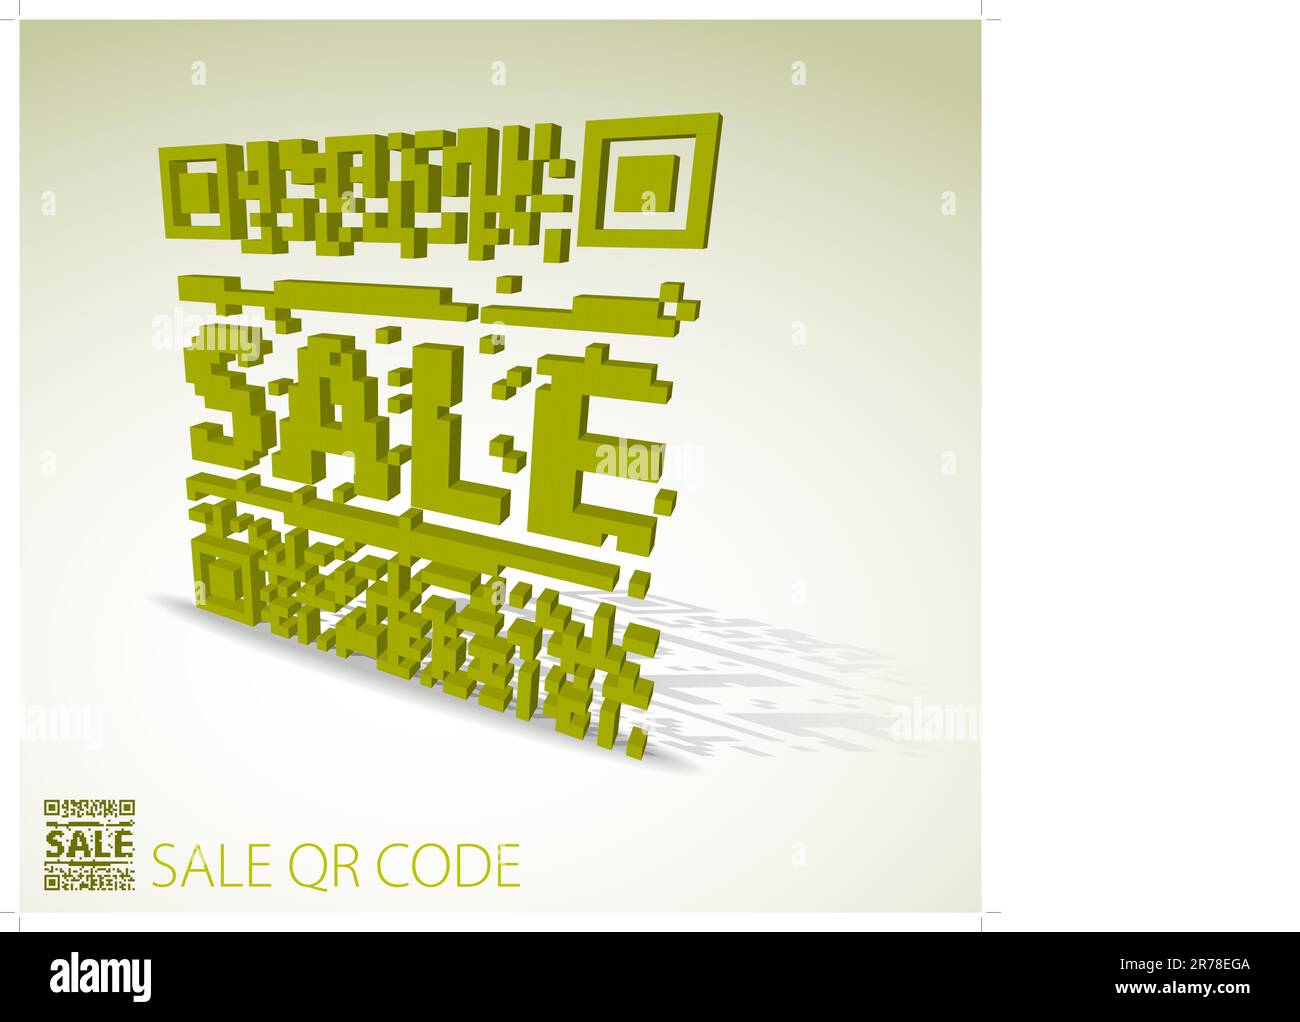 Green 3D qr code for item in sale  (modern bar codes) Stock Vector